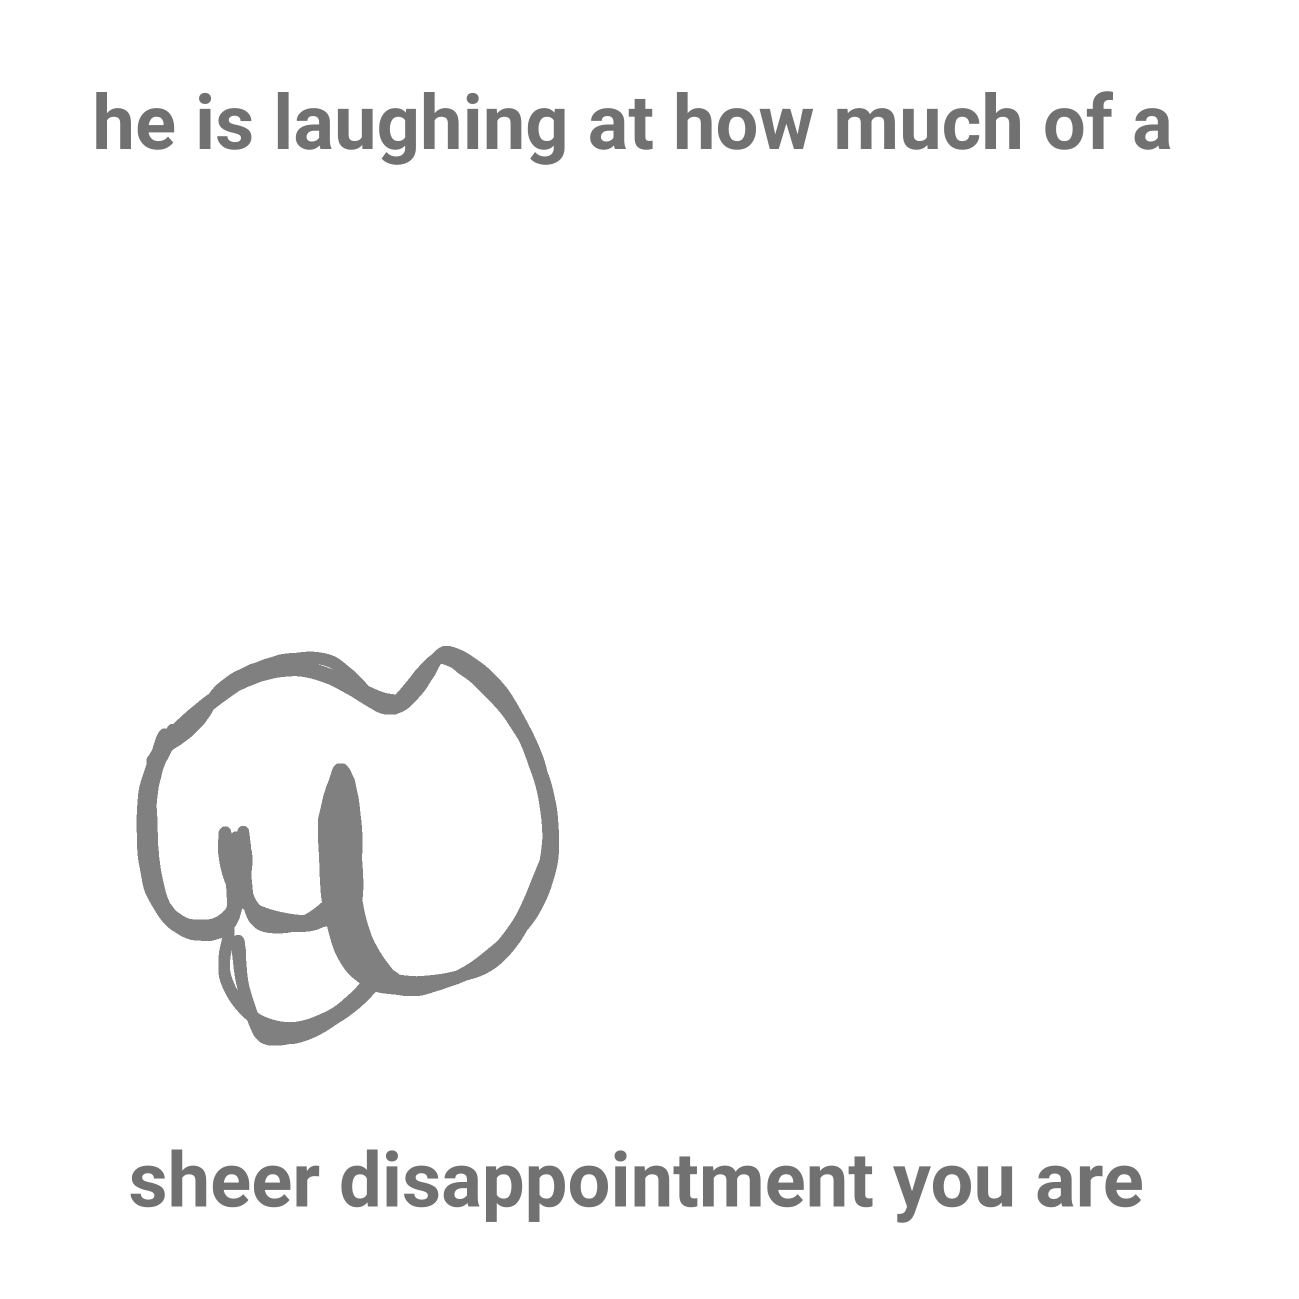 High Quality He is laughing at how much of a sheer disappointment you are Blank Meme Template